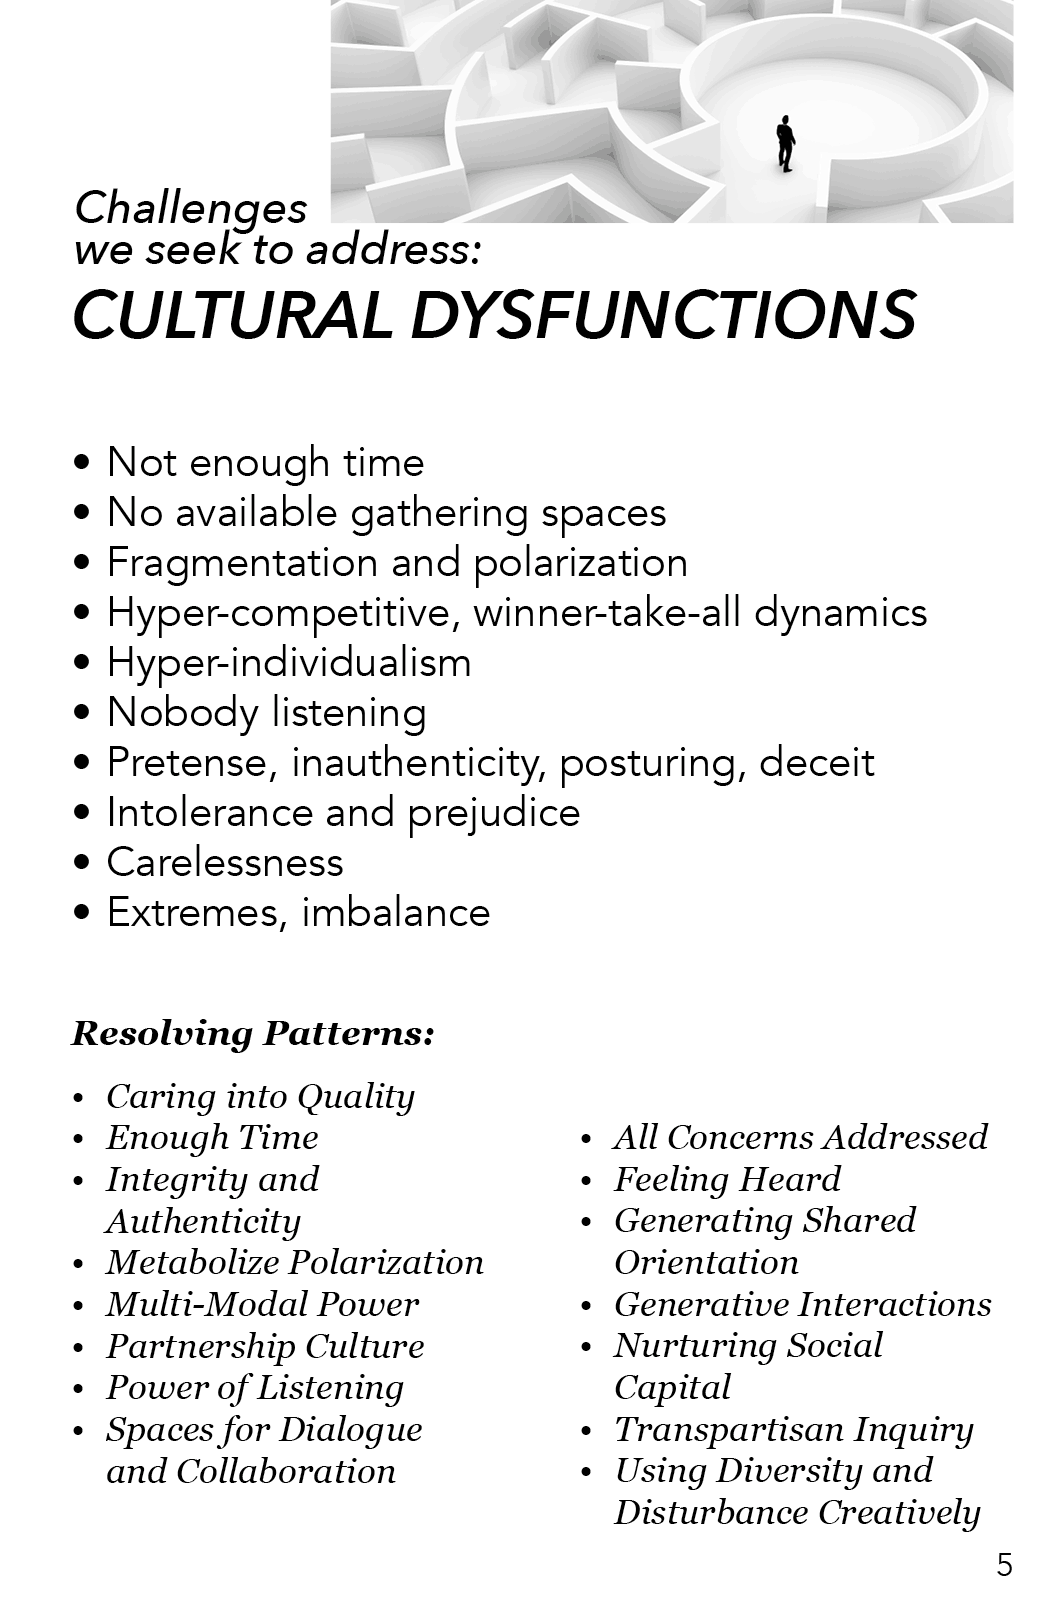 AAA - Cultural Dysfunctions